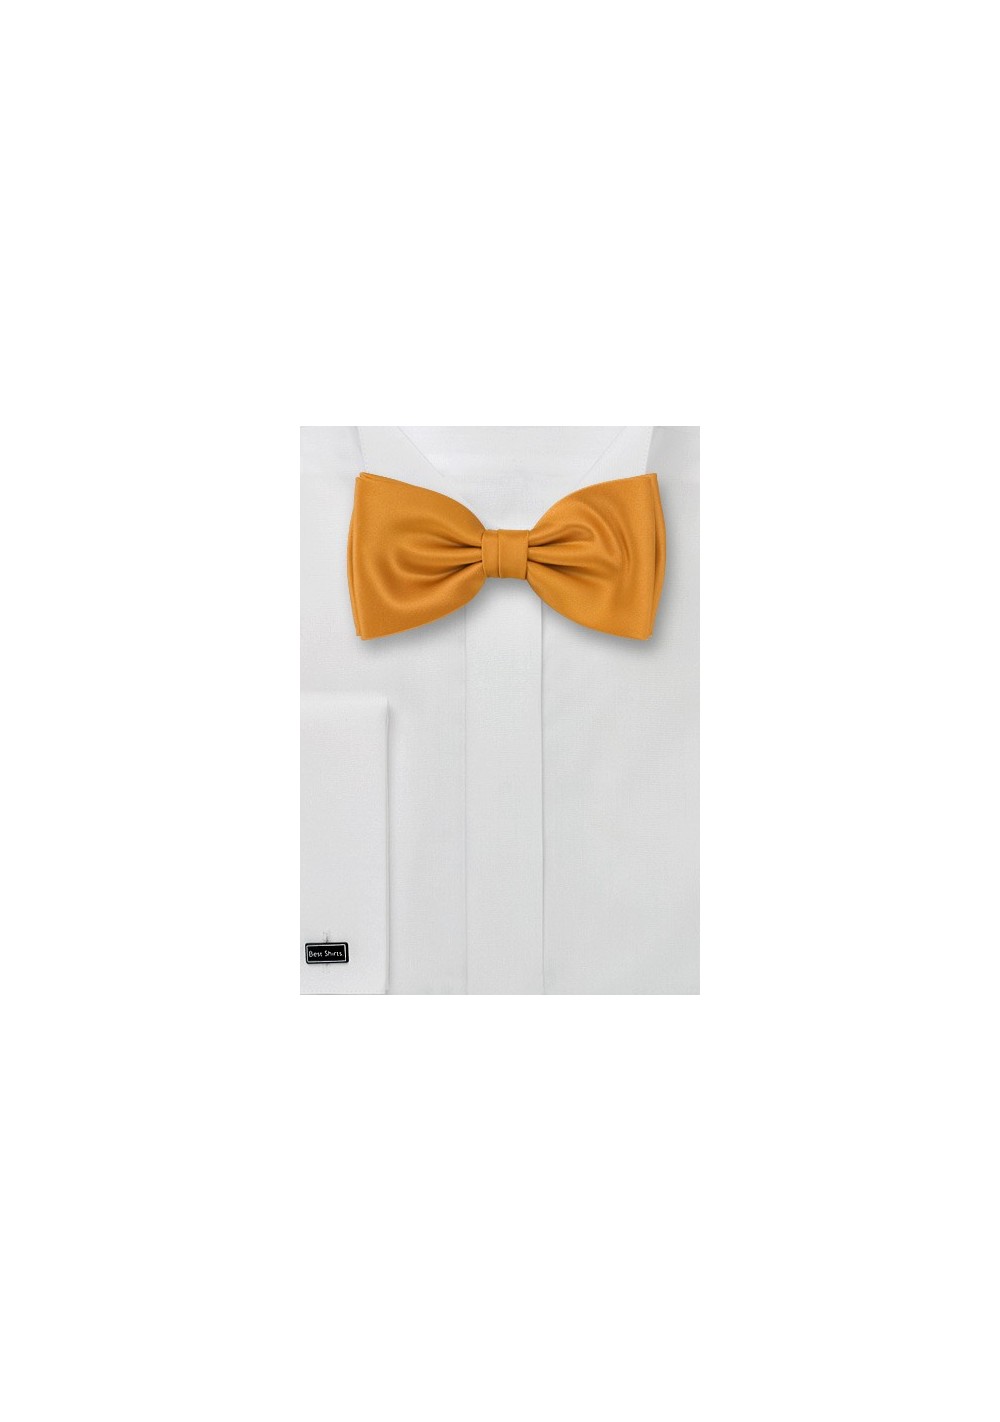 Solid color bow ties - Amber-yellow bow tie